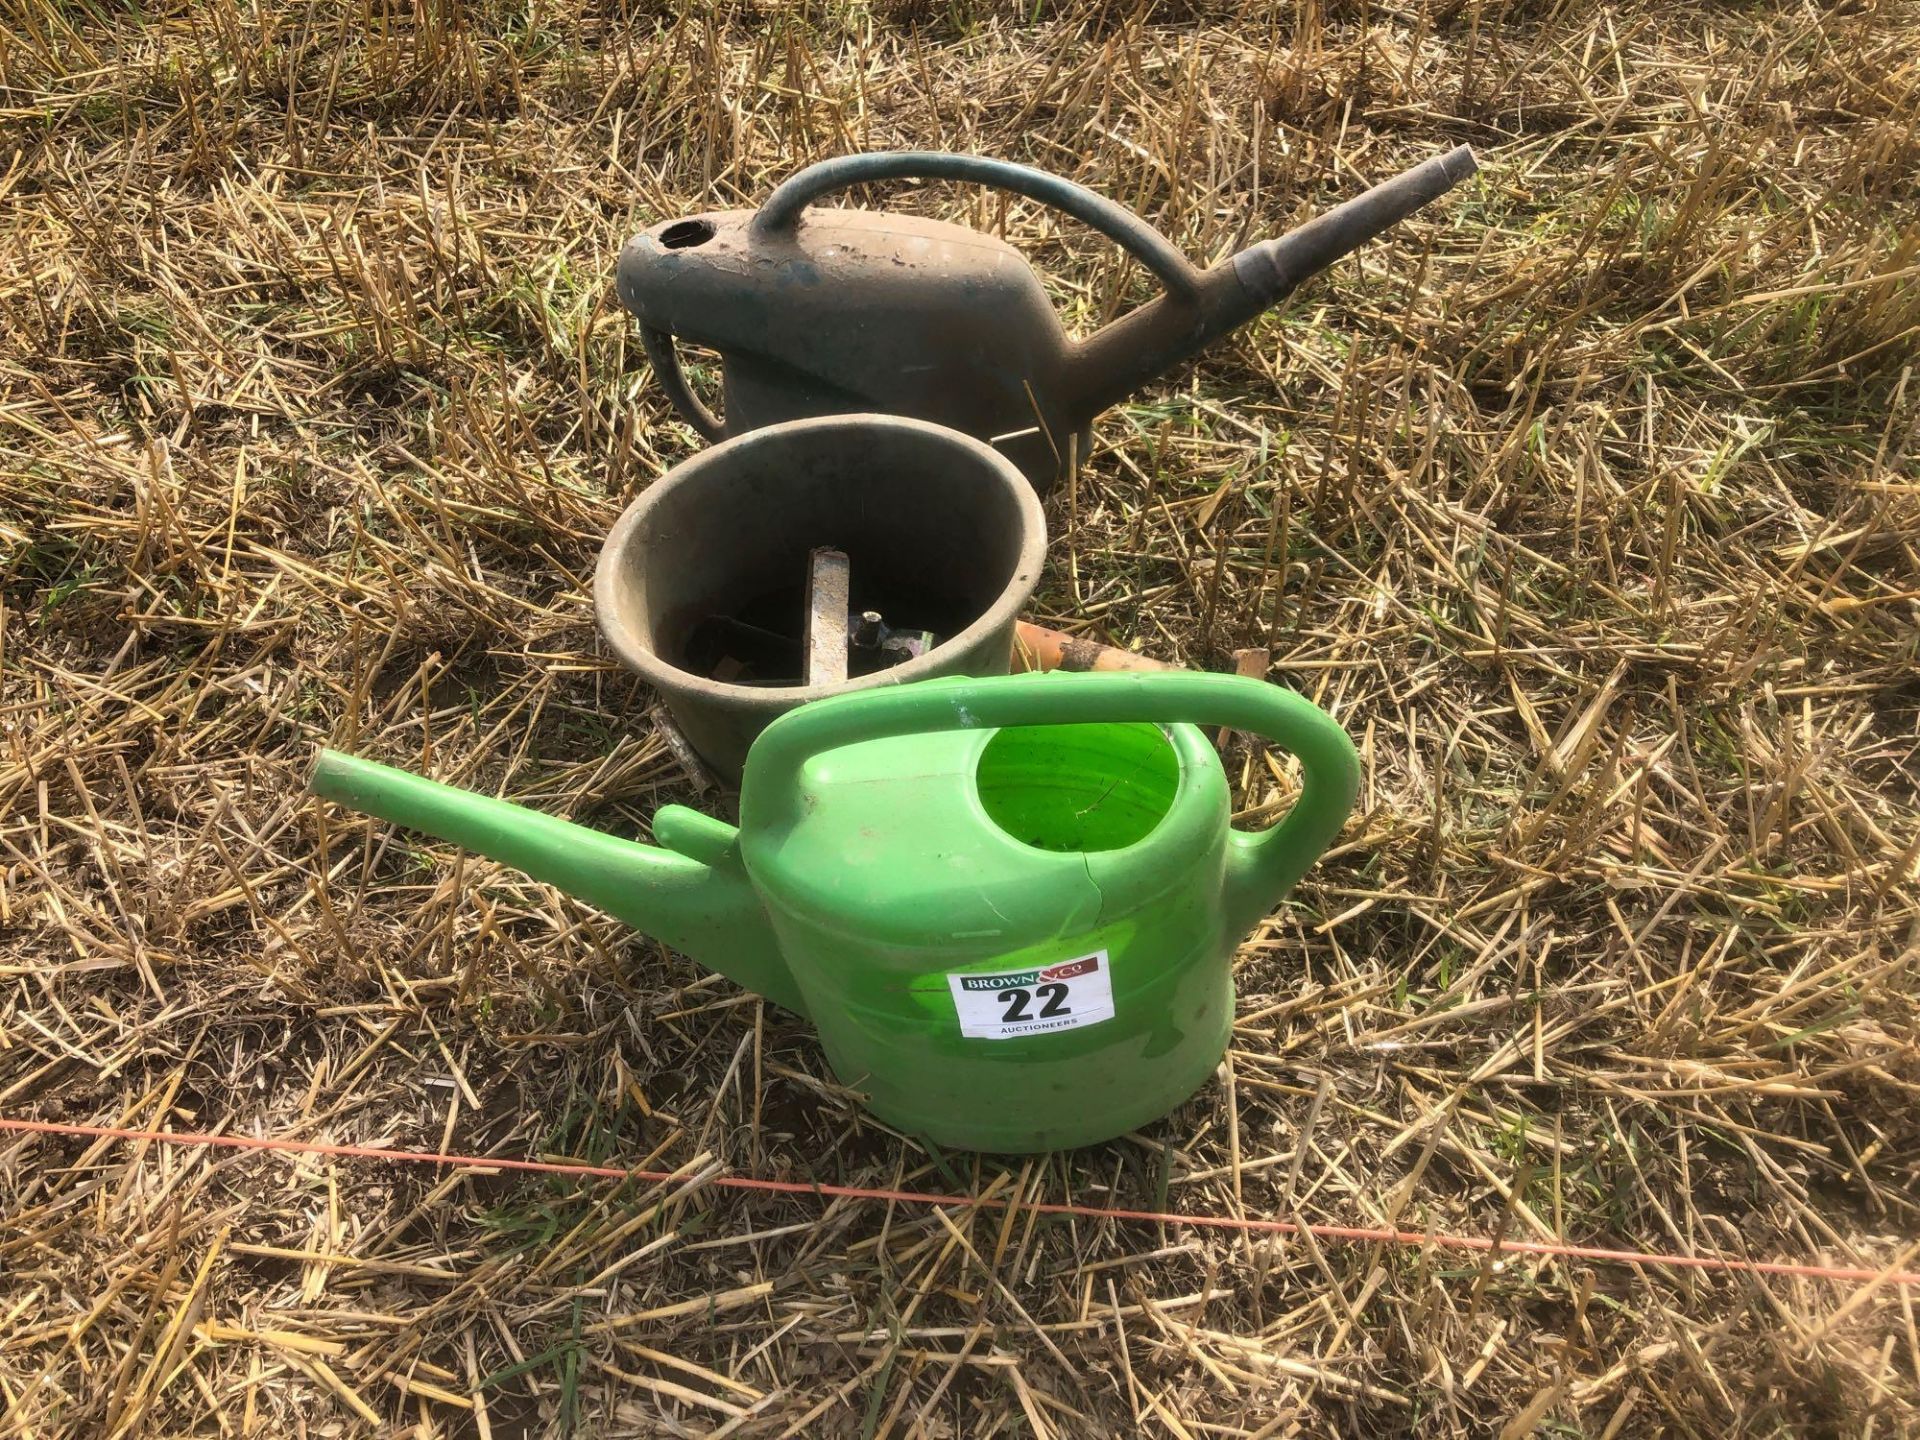 Watering cans and parts